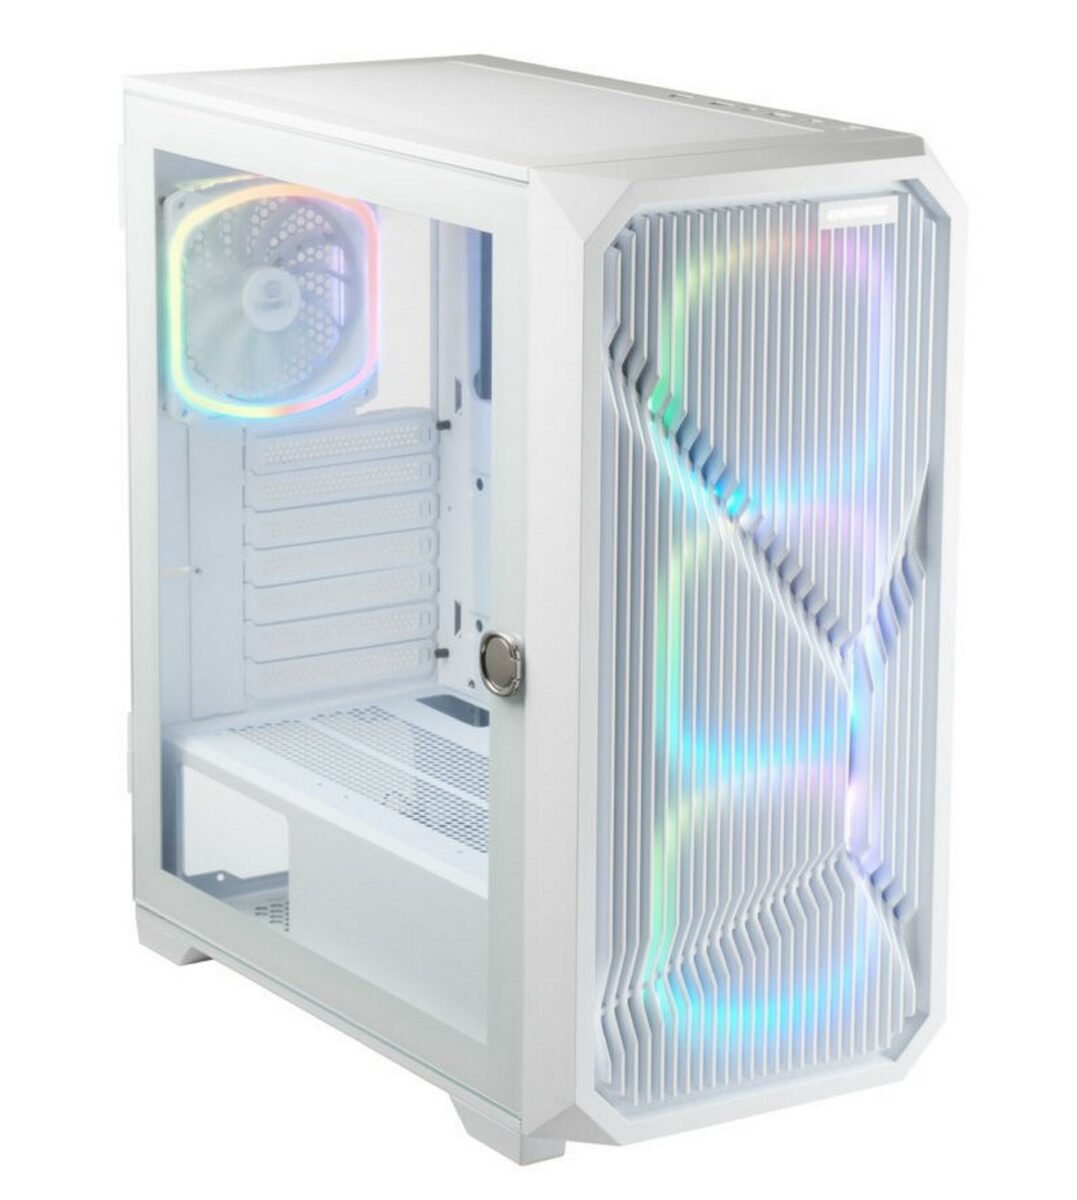 Front of the special white edition Enermax Enerpazo EP237 chassis.